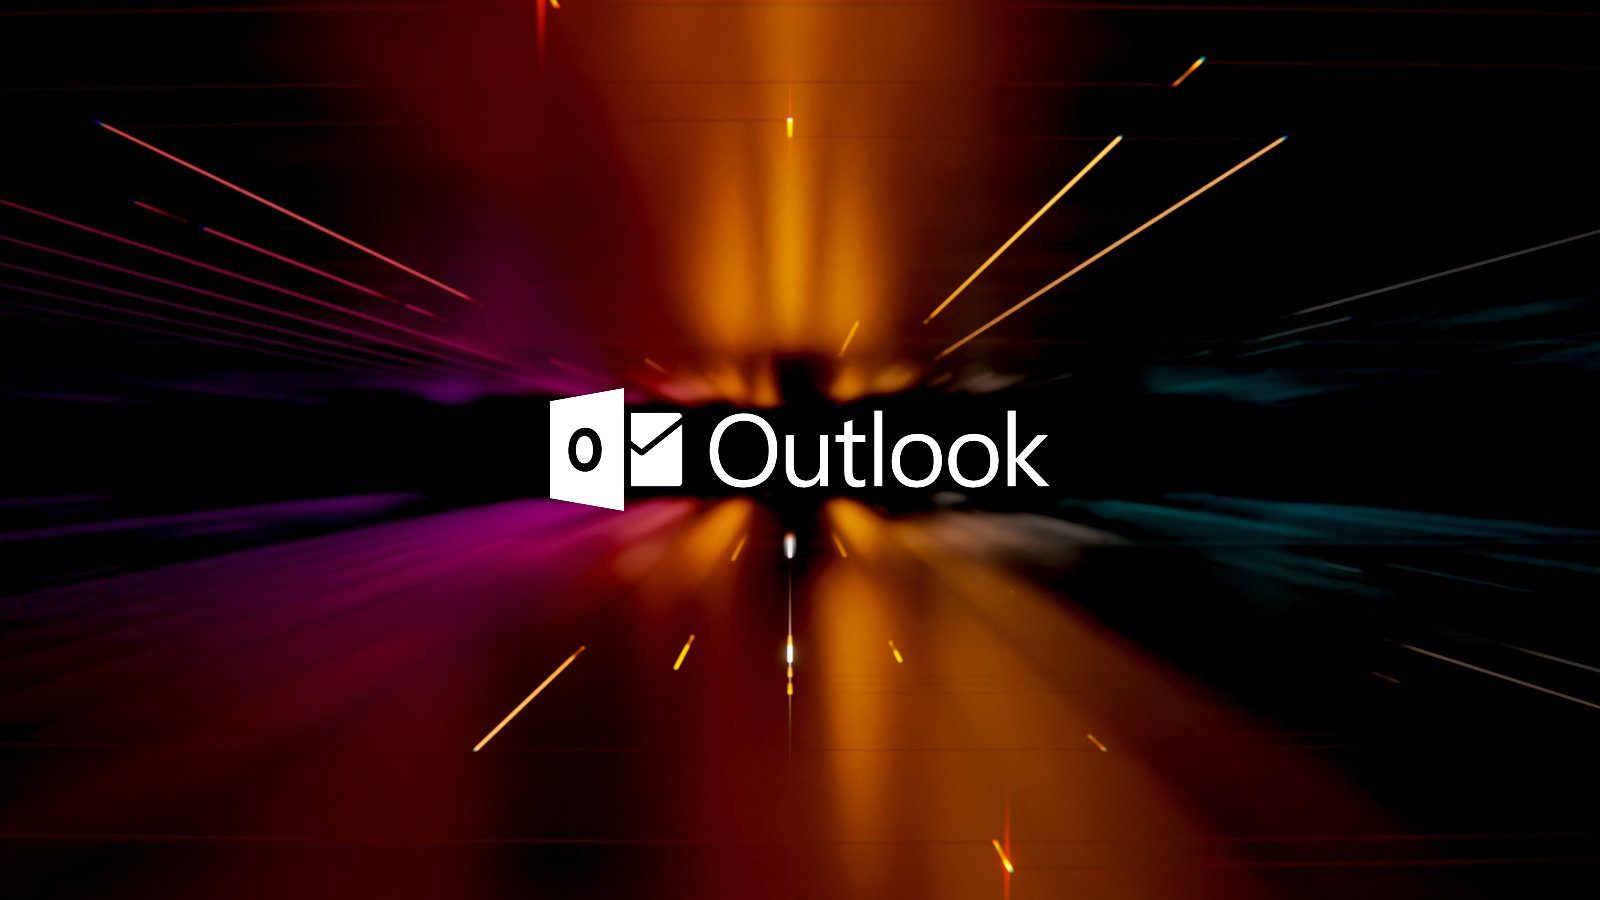 Microsoft patches bypass for recently fixed Outlook zero-click bug – Source: www.bleepingcomputer.com